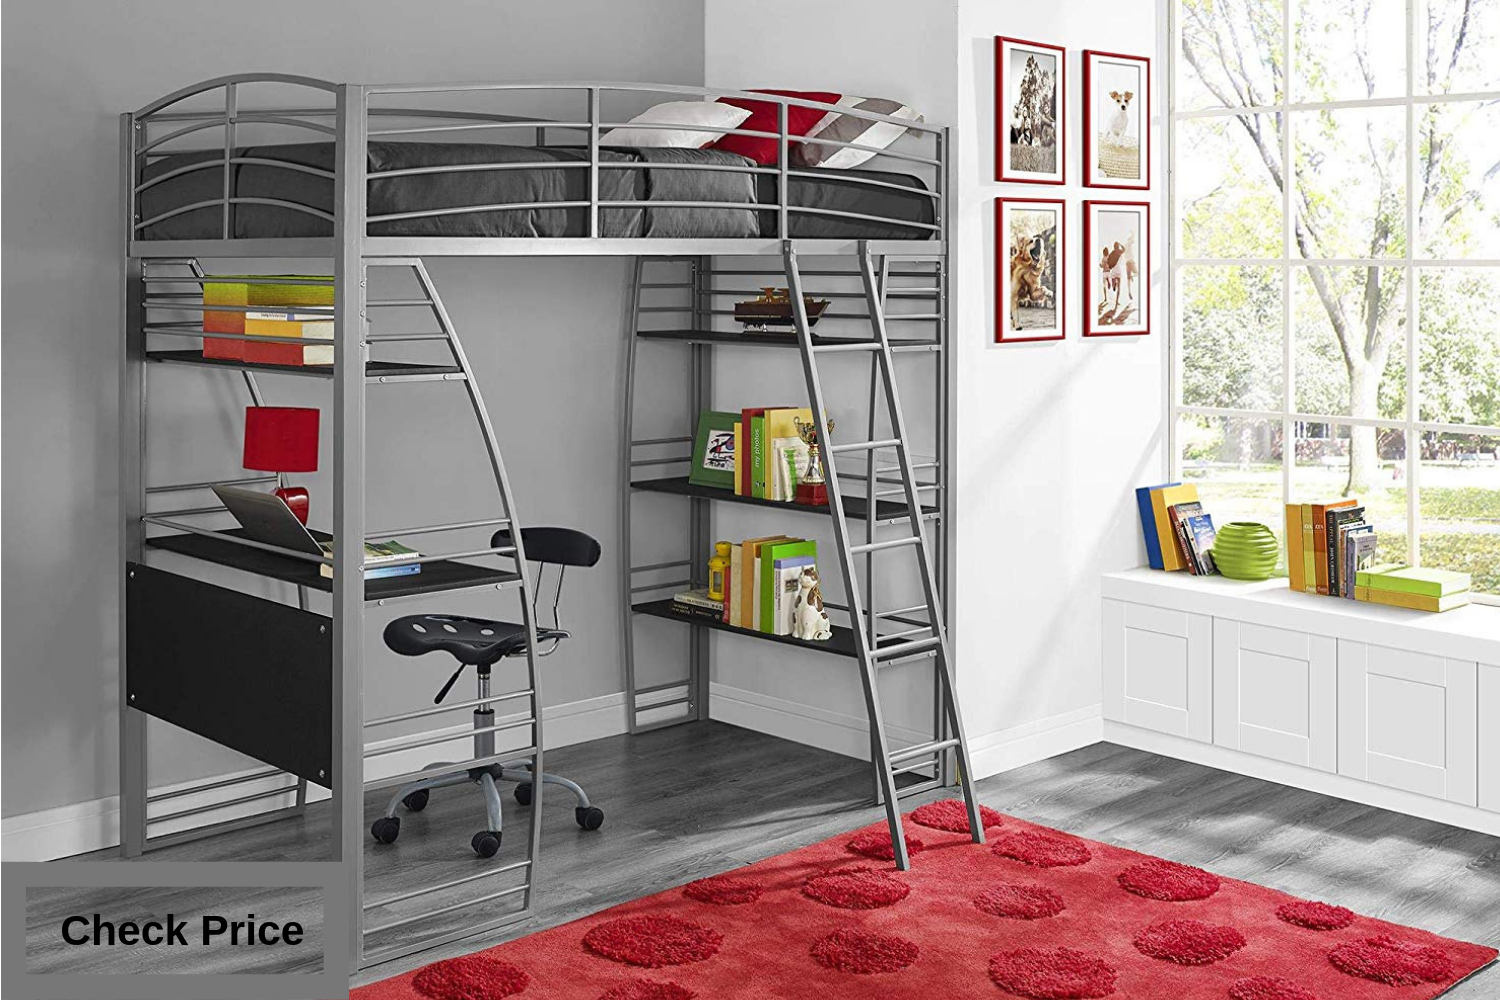 Loft Beds Should You Consider A, Are Loft Beds Worth It